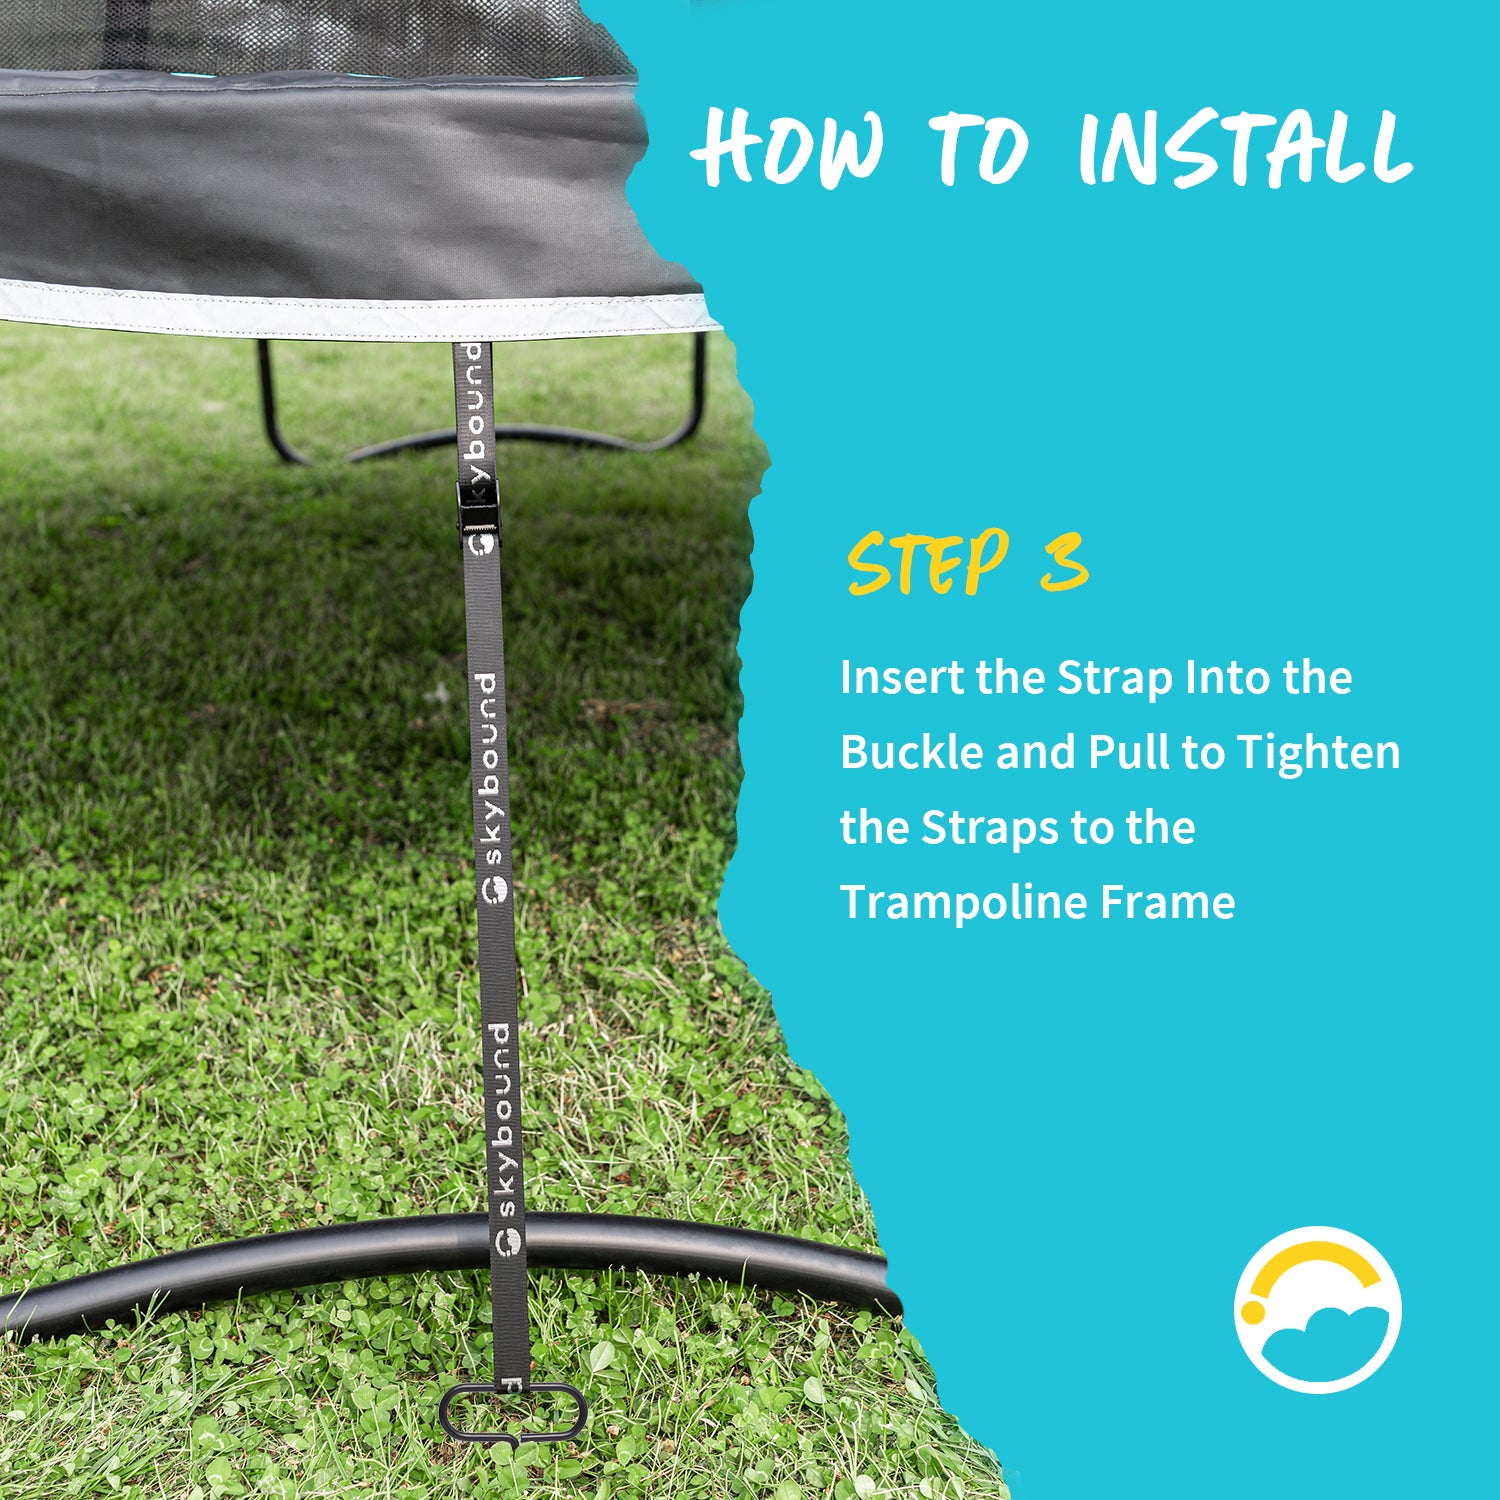 How to Install: Step 3-Insert the Strap Into the Buckle and Pull to Tighten the Straps to the Trampoline Frame.  